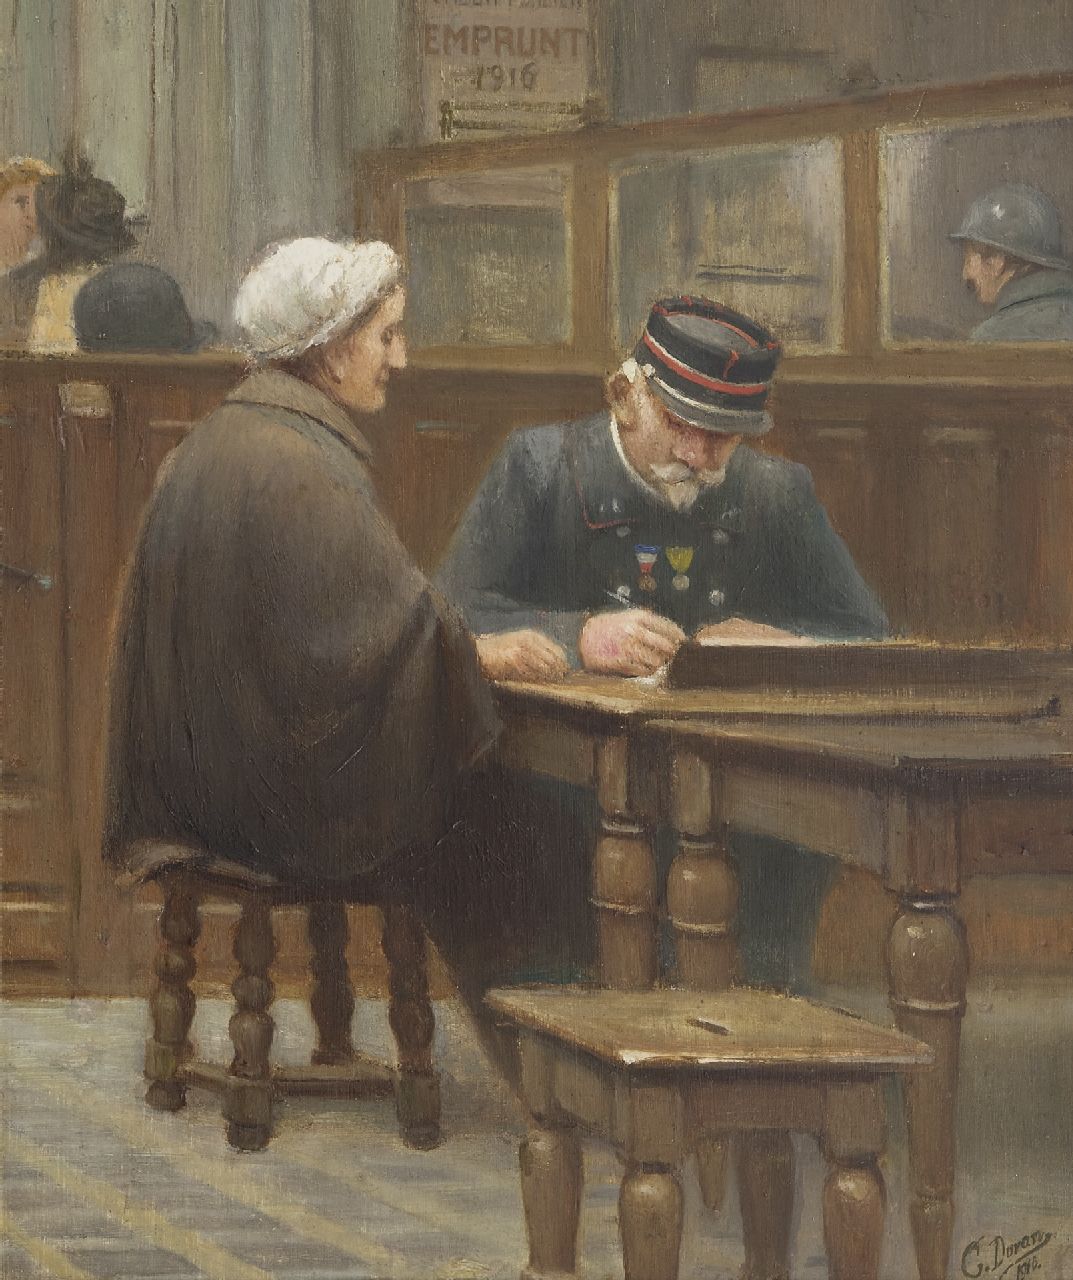 Duran G.  | Duran | Paintings offered for sale | At the mortgage bank, oil on panel 43.1 x 36.1 cm, signed l.r. and dated 1910